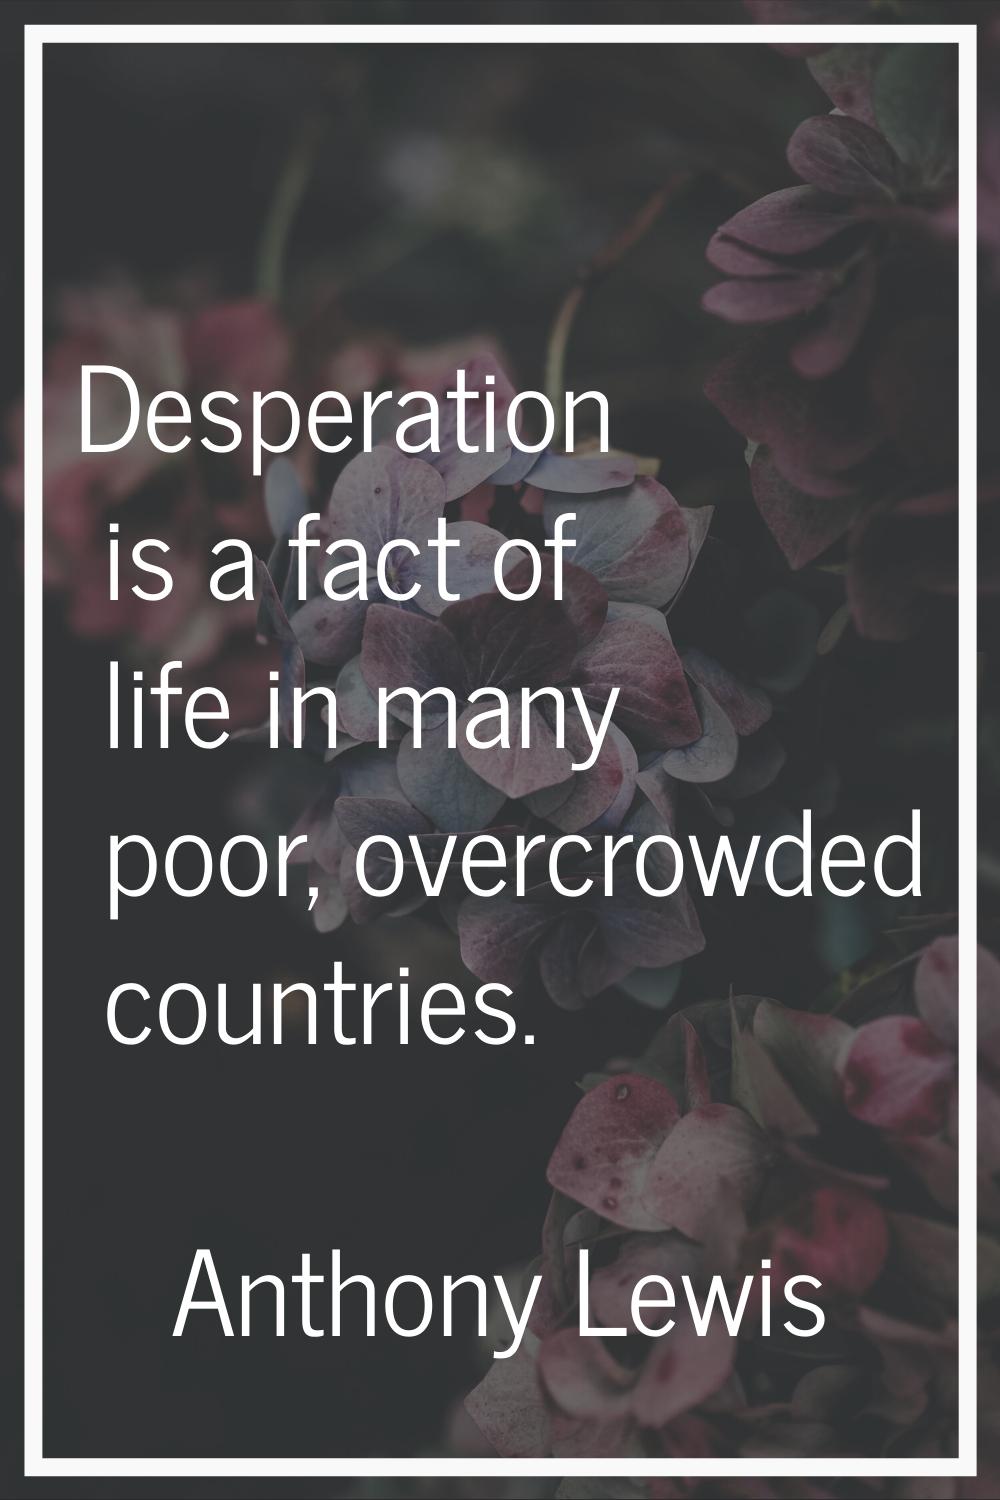 Desperation is a fact of life in many poor, overcrowded countries.